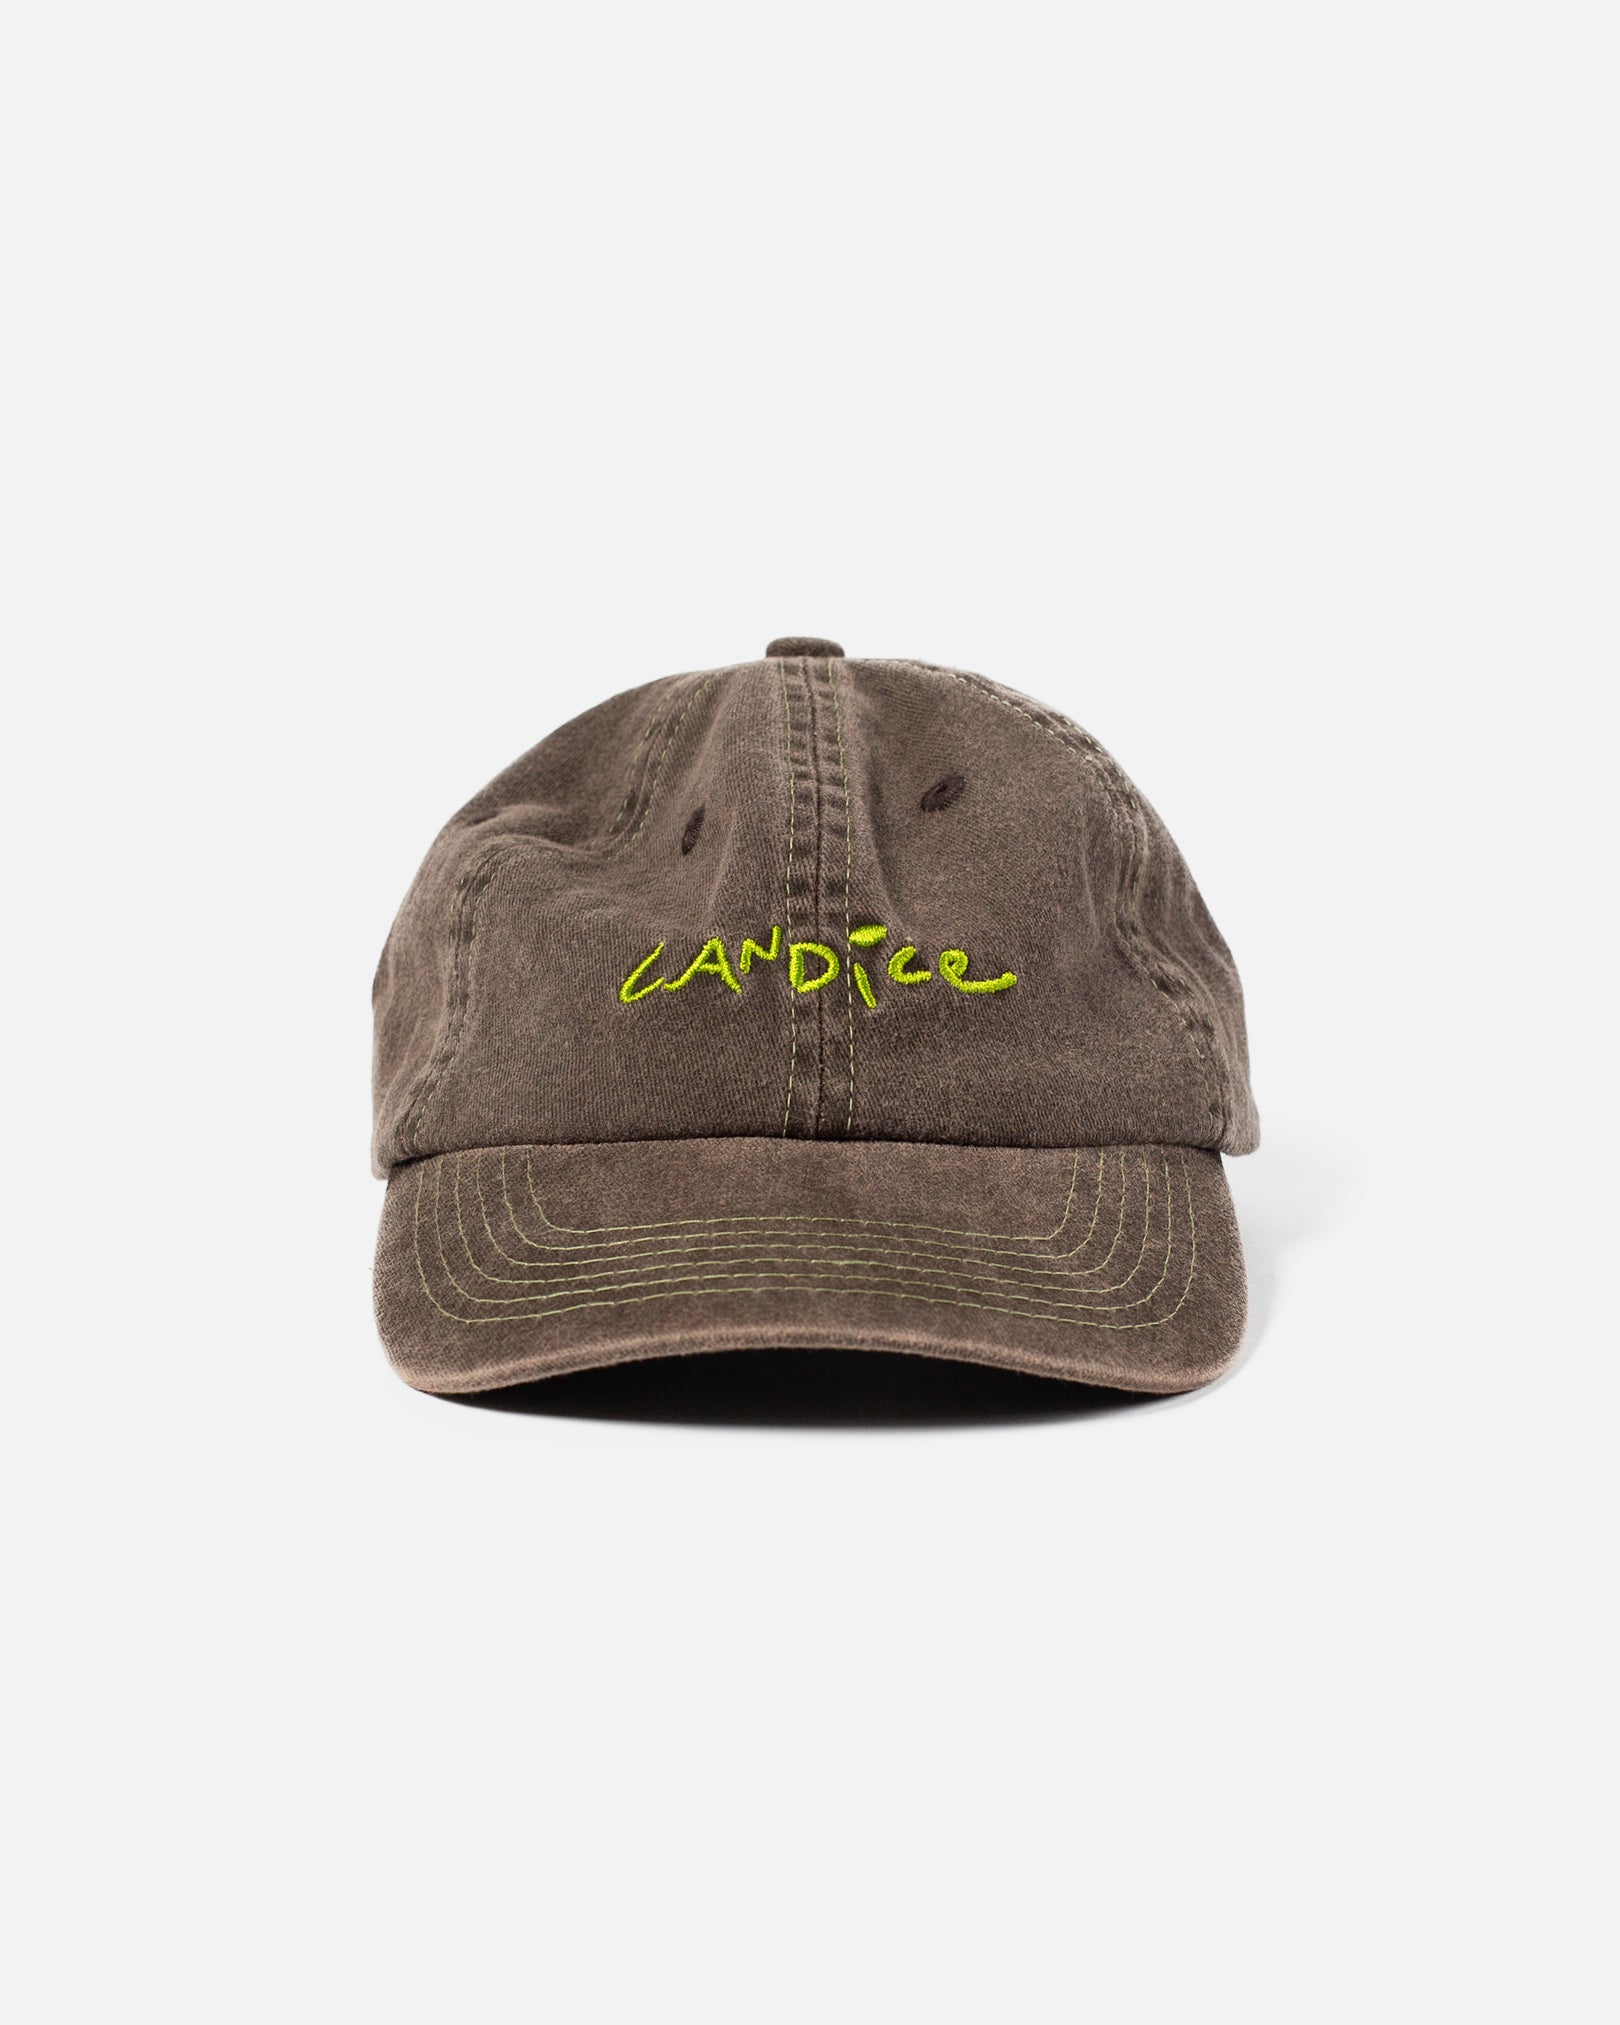 candice-washed-logo-dad-hat-front